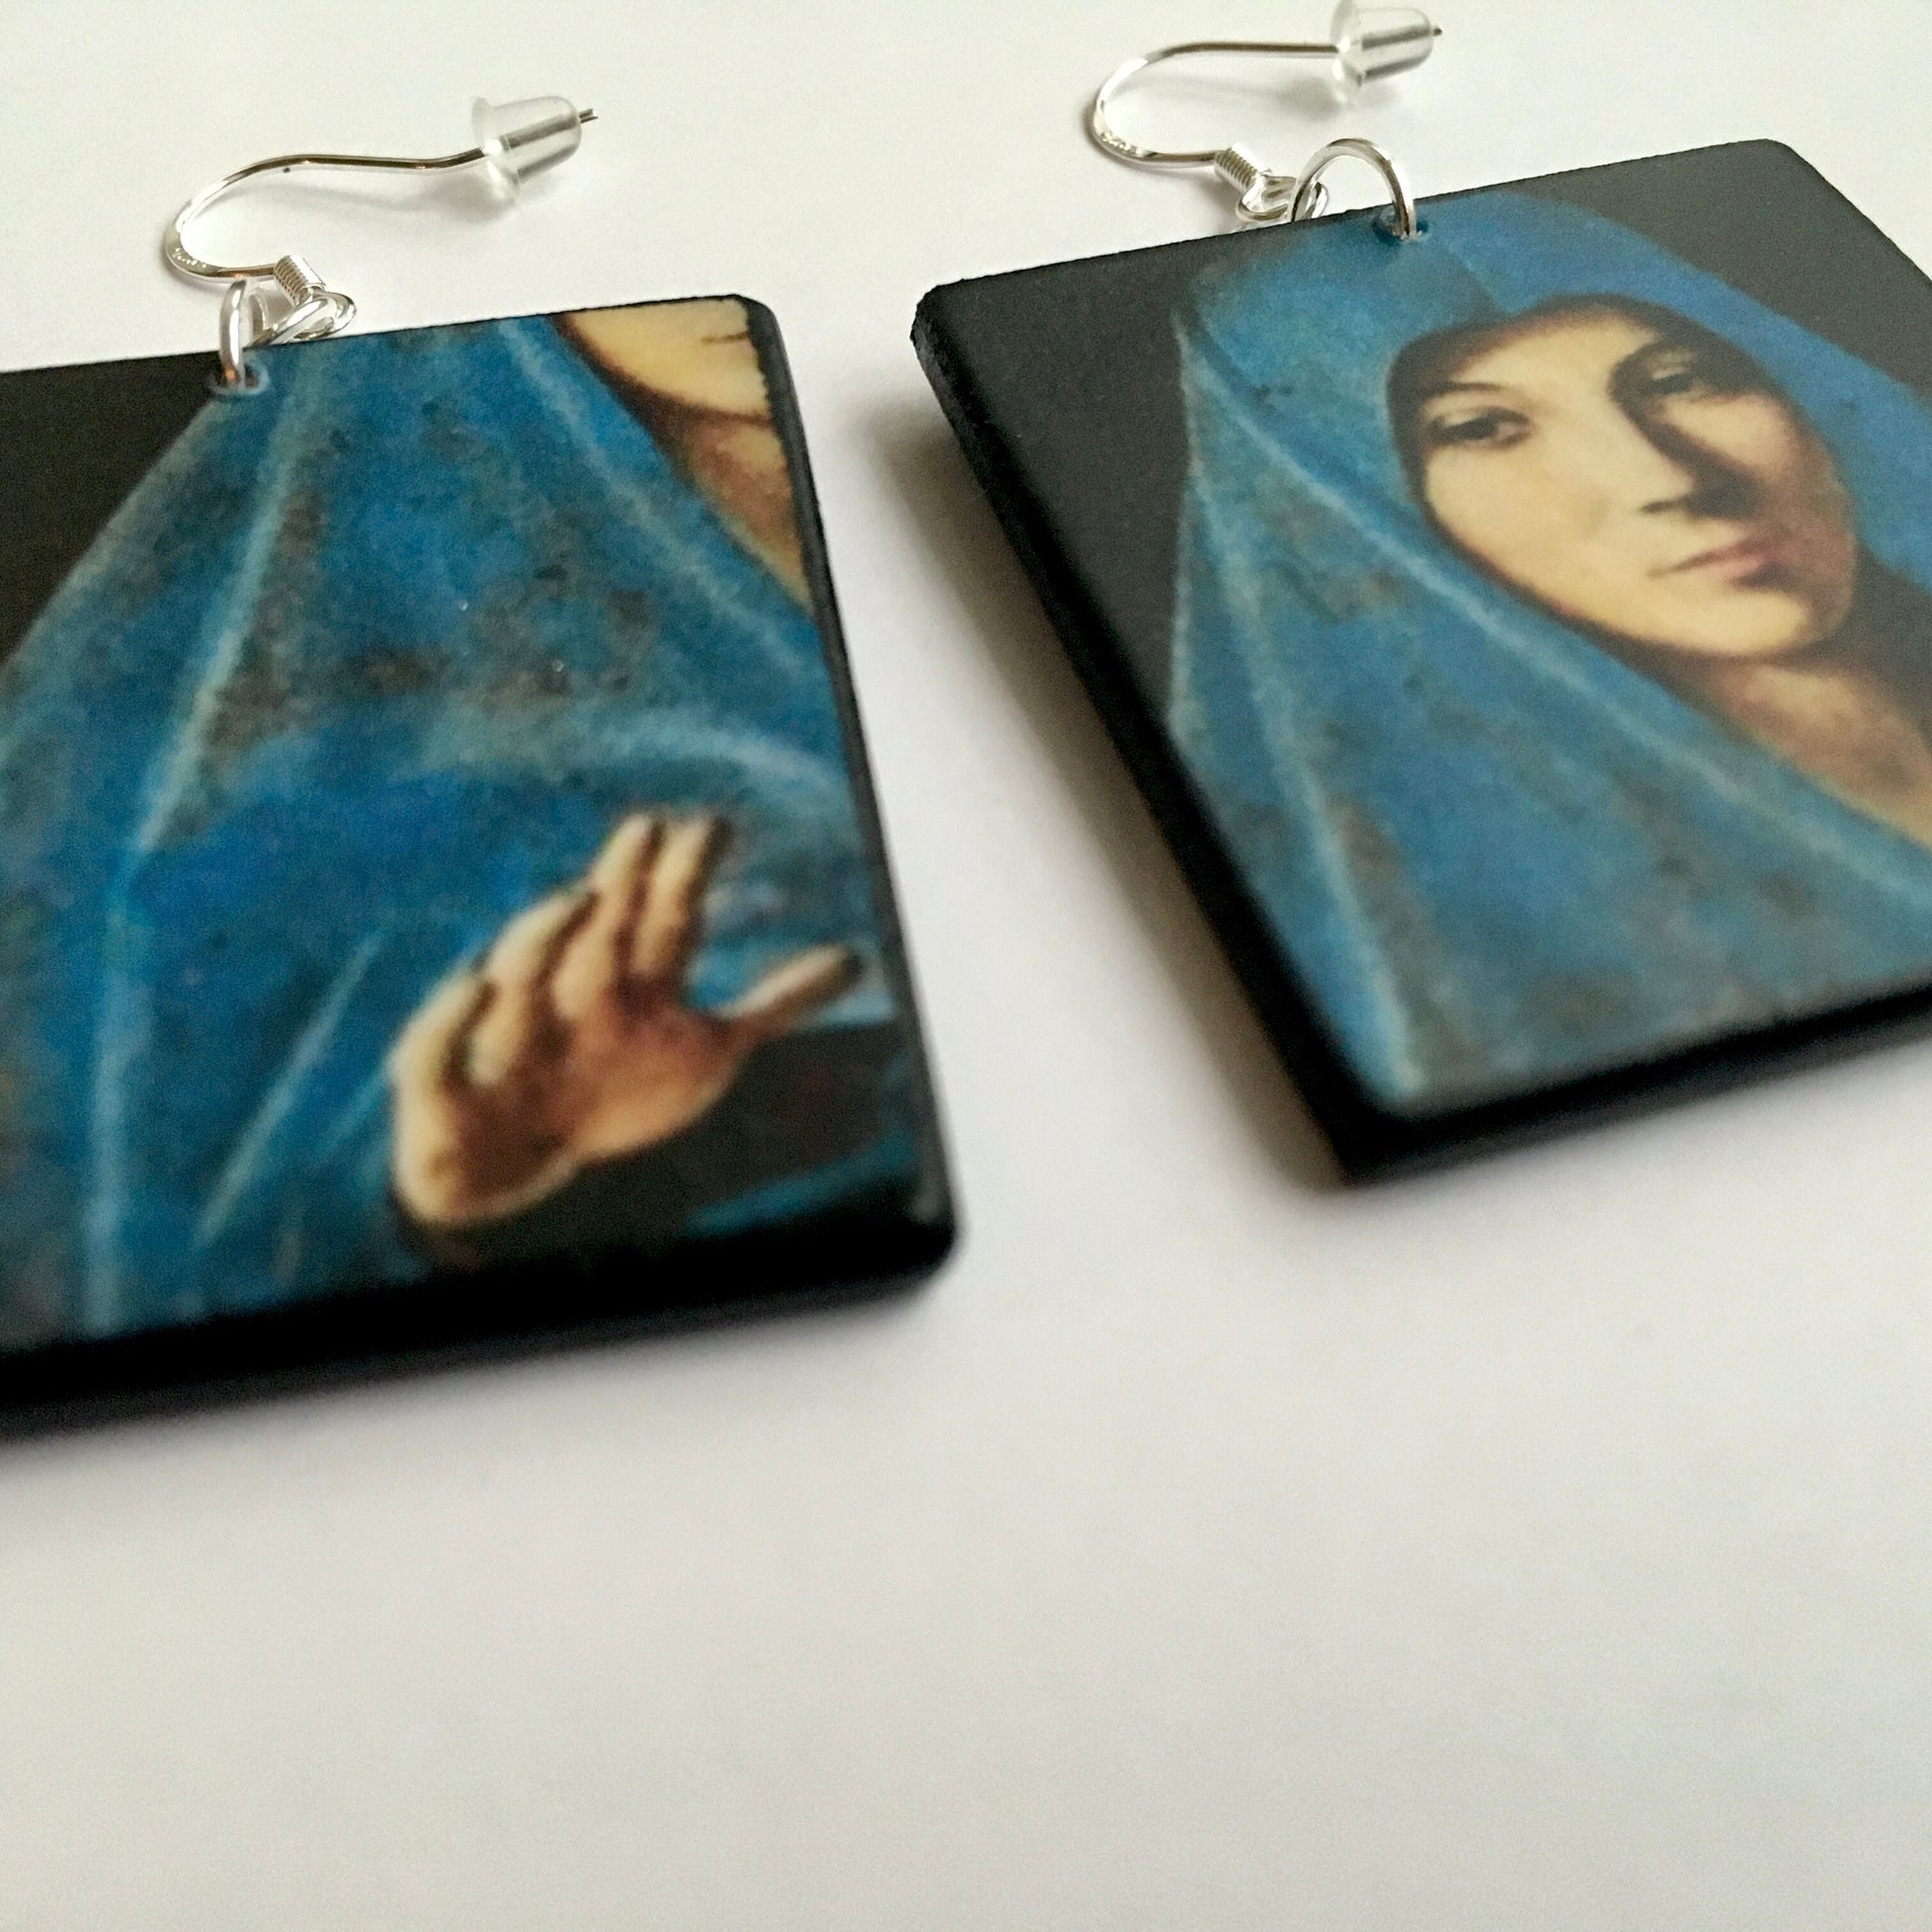 Italian Renaissance art, Antonello da Messina, Annunciata earrings.  Madonna with blue veil art detail on top of these aesthetic, mismatched earrings handmade from sustainable wood and sterling silver hooks  by Obljewellery.